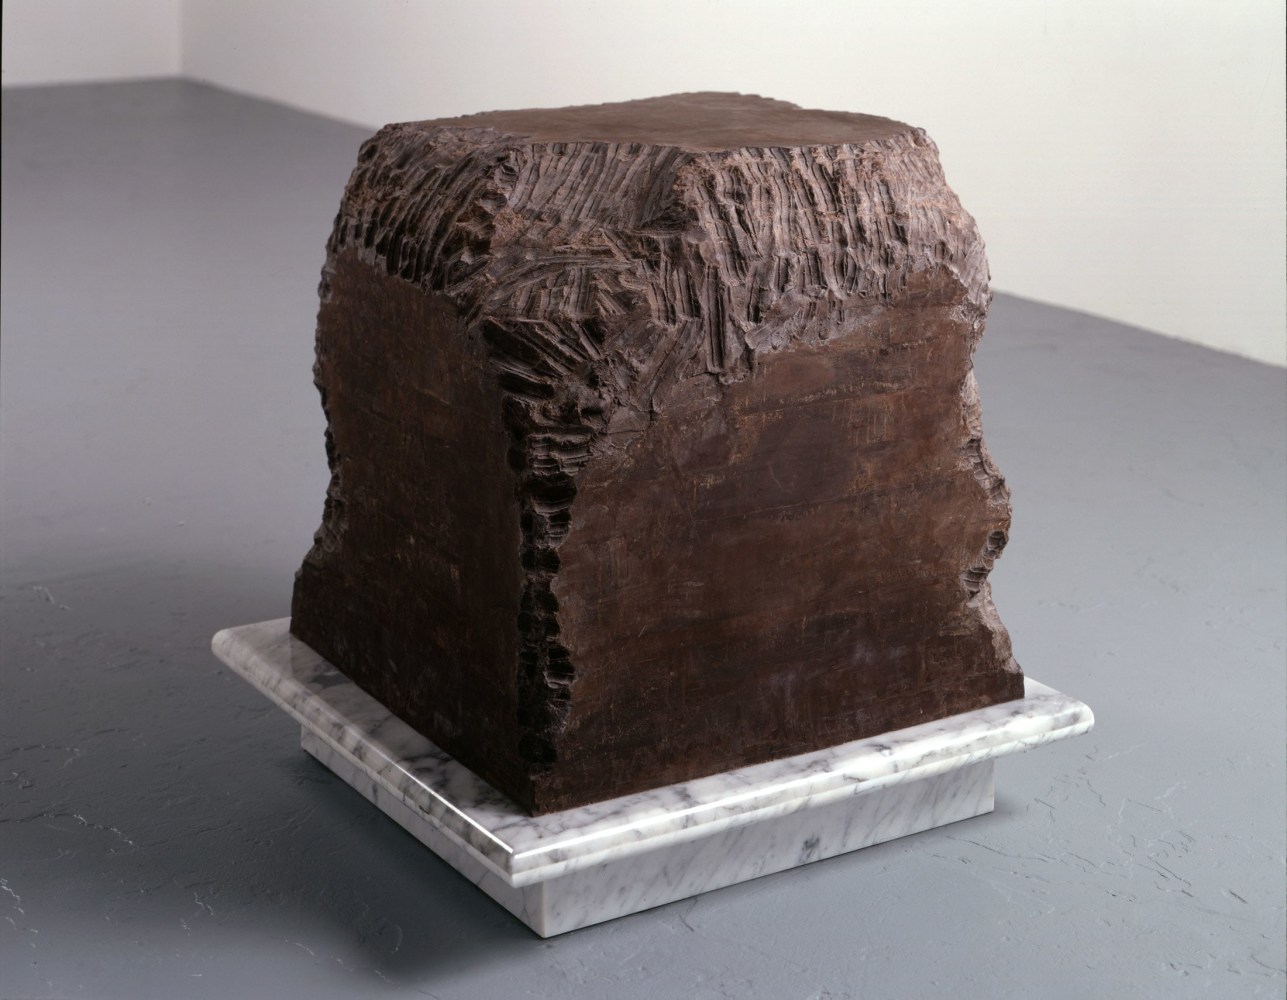 Janine Antoni
Gnaw, 1992
600 lbs&amp;nbsp;of chocolate and 600 lbs of lard gnawed by the artist
45 heart-shaped packages for chocolate made from chewed chocolate removed from the chocolate cube and 150 lipsticks made with pigment, beeswax and chewed lard removed from the lard cube